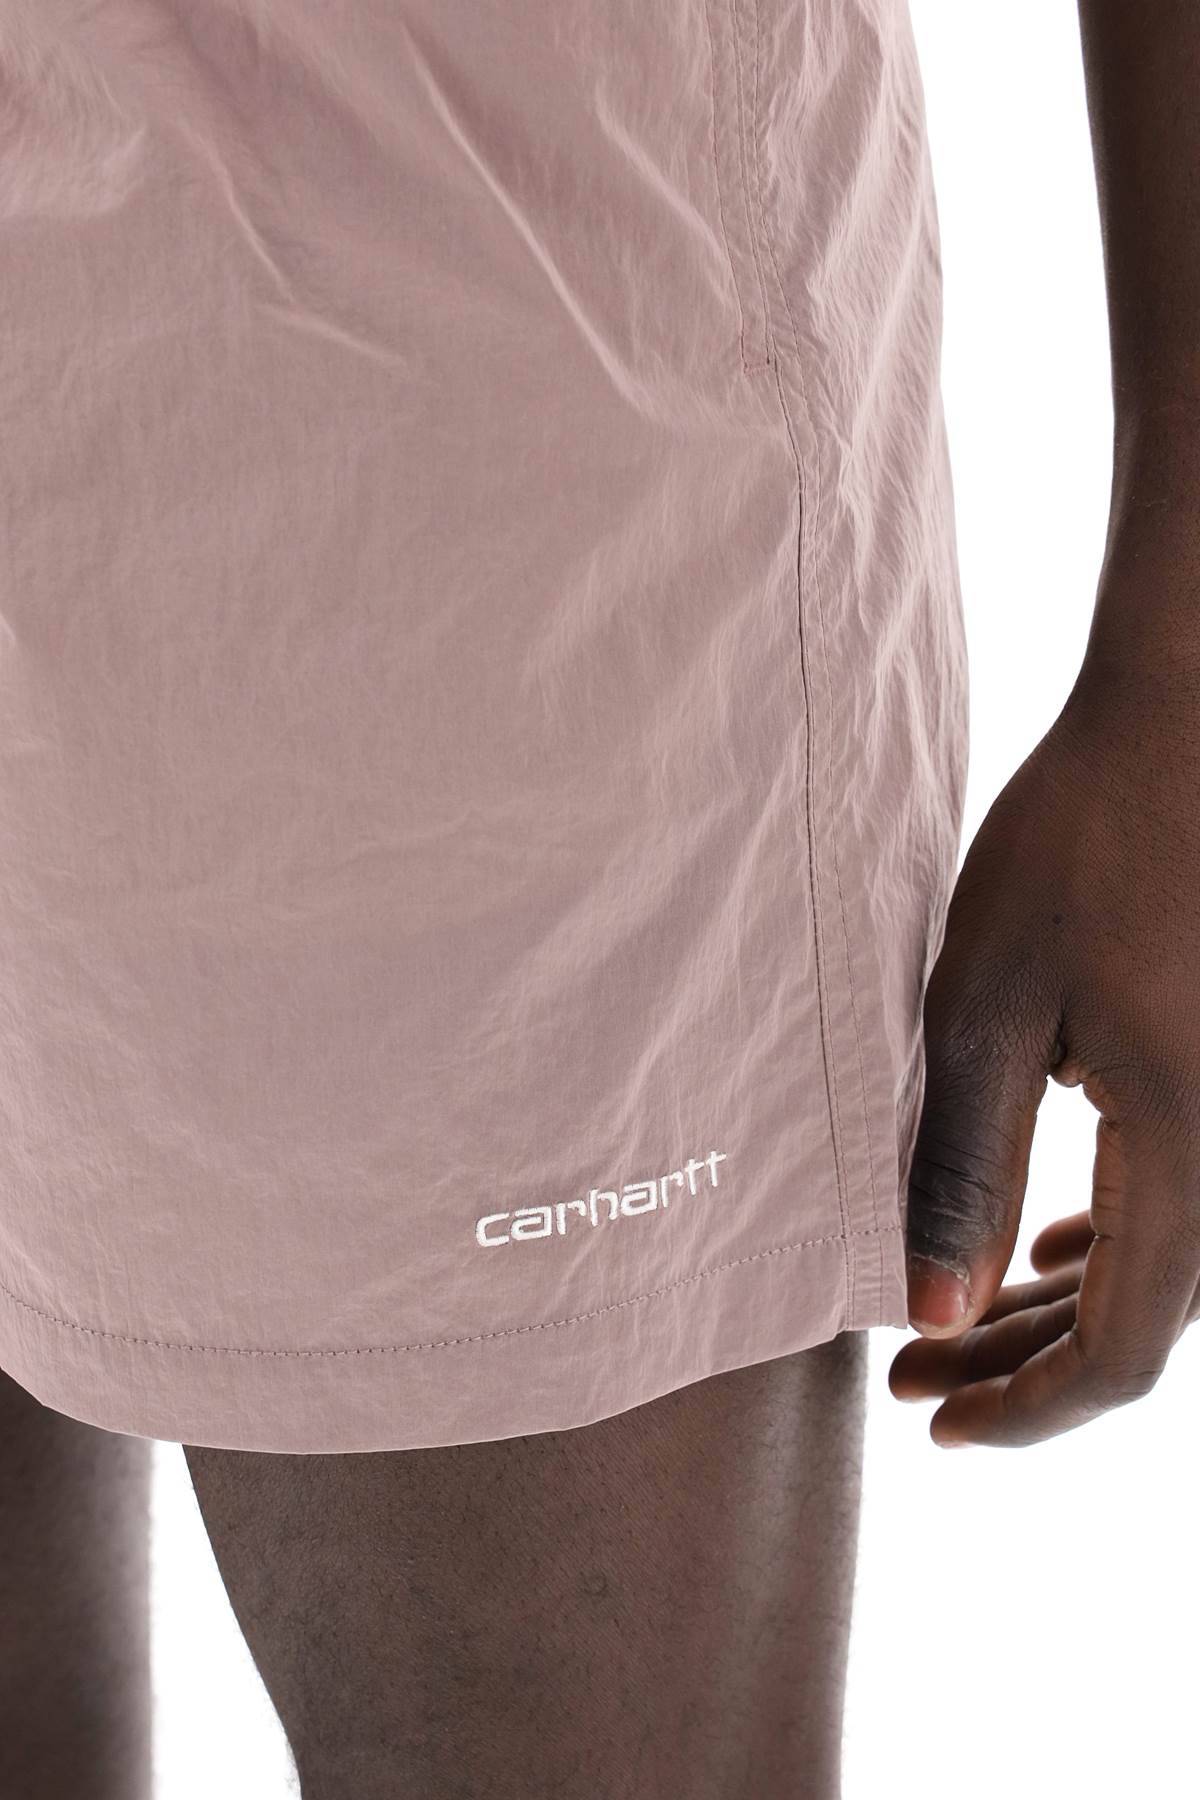 Shop Carhartt Tobes Swim Trunks For In Pink